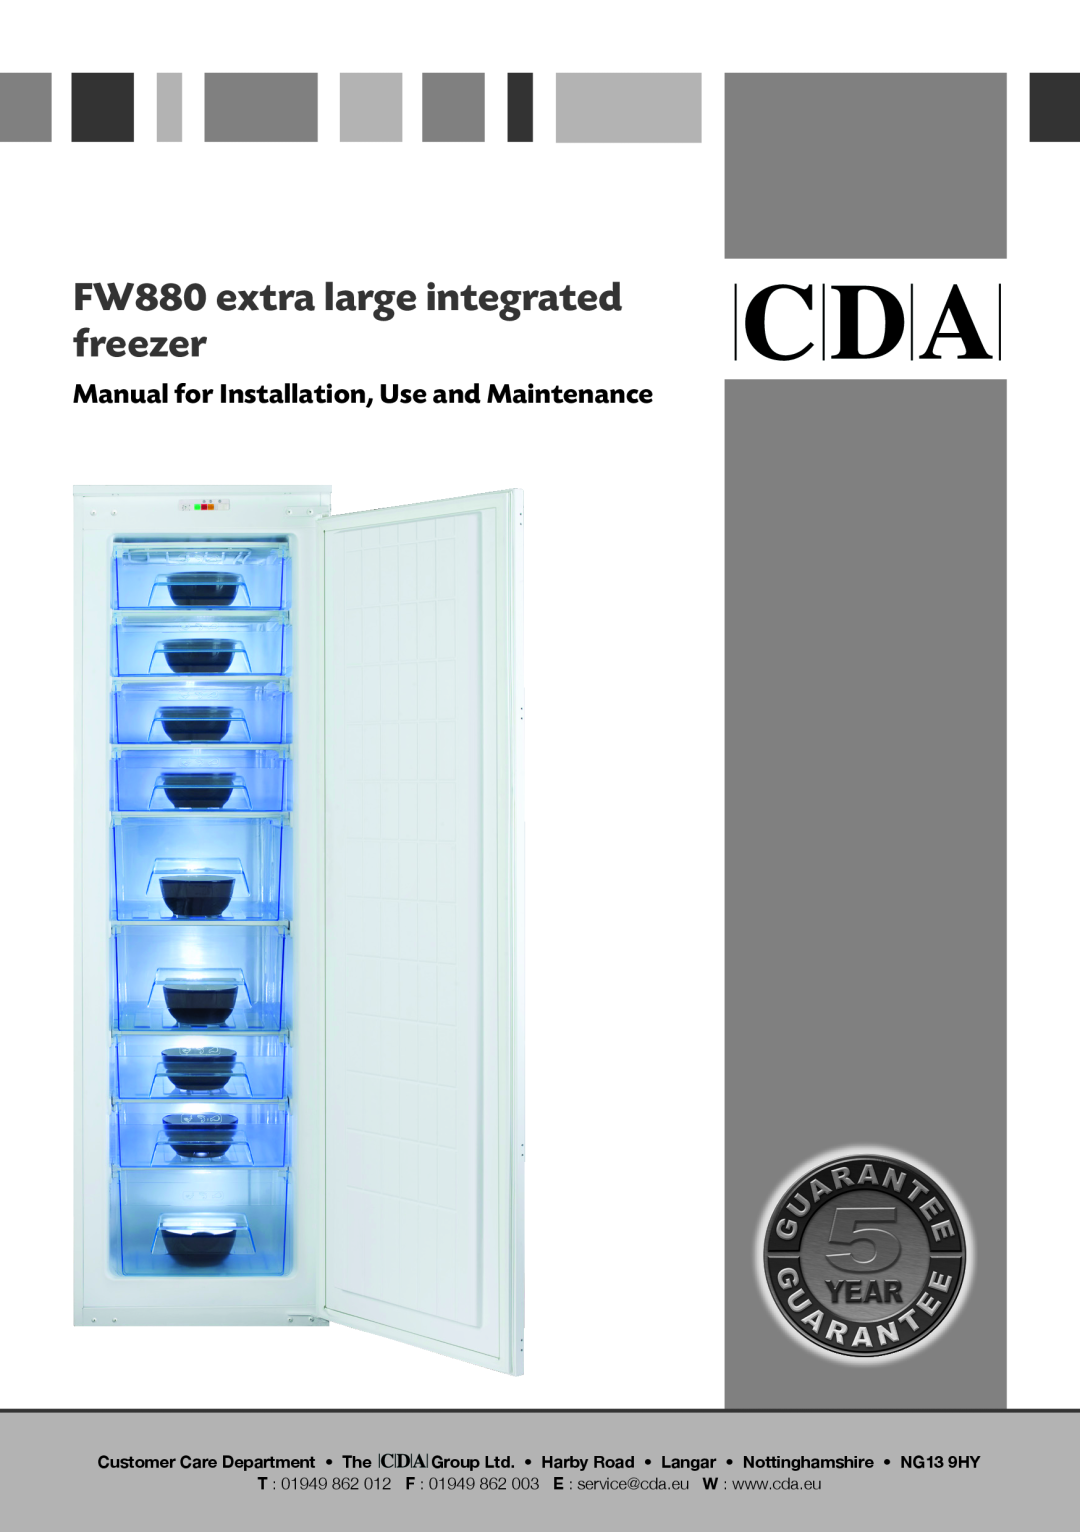 CDA manual FW880 extra large integrated freezer, Manual for Installation, Use and Maintenance, T 